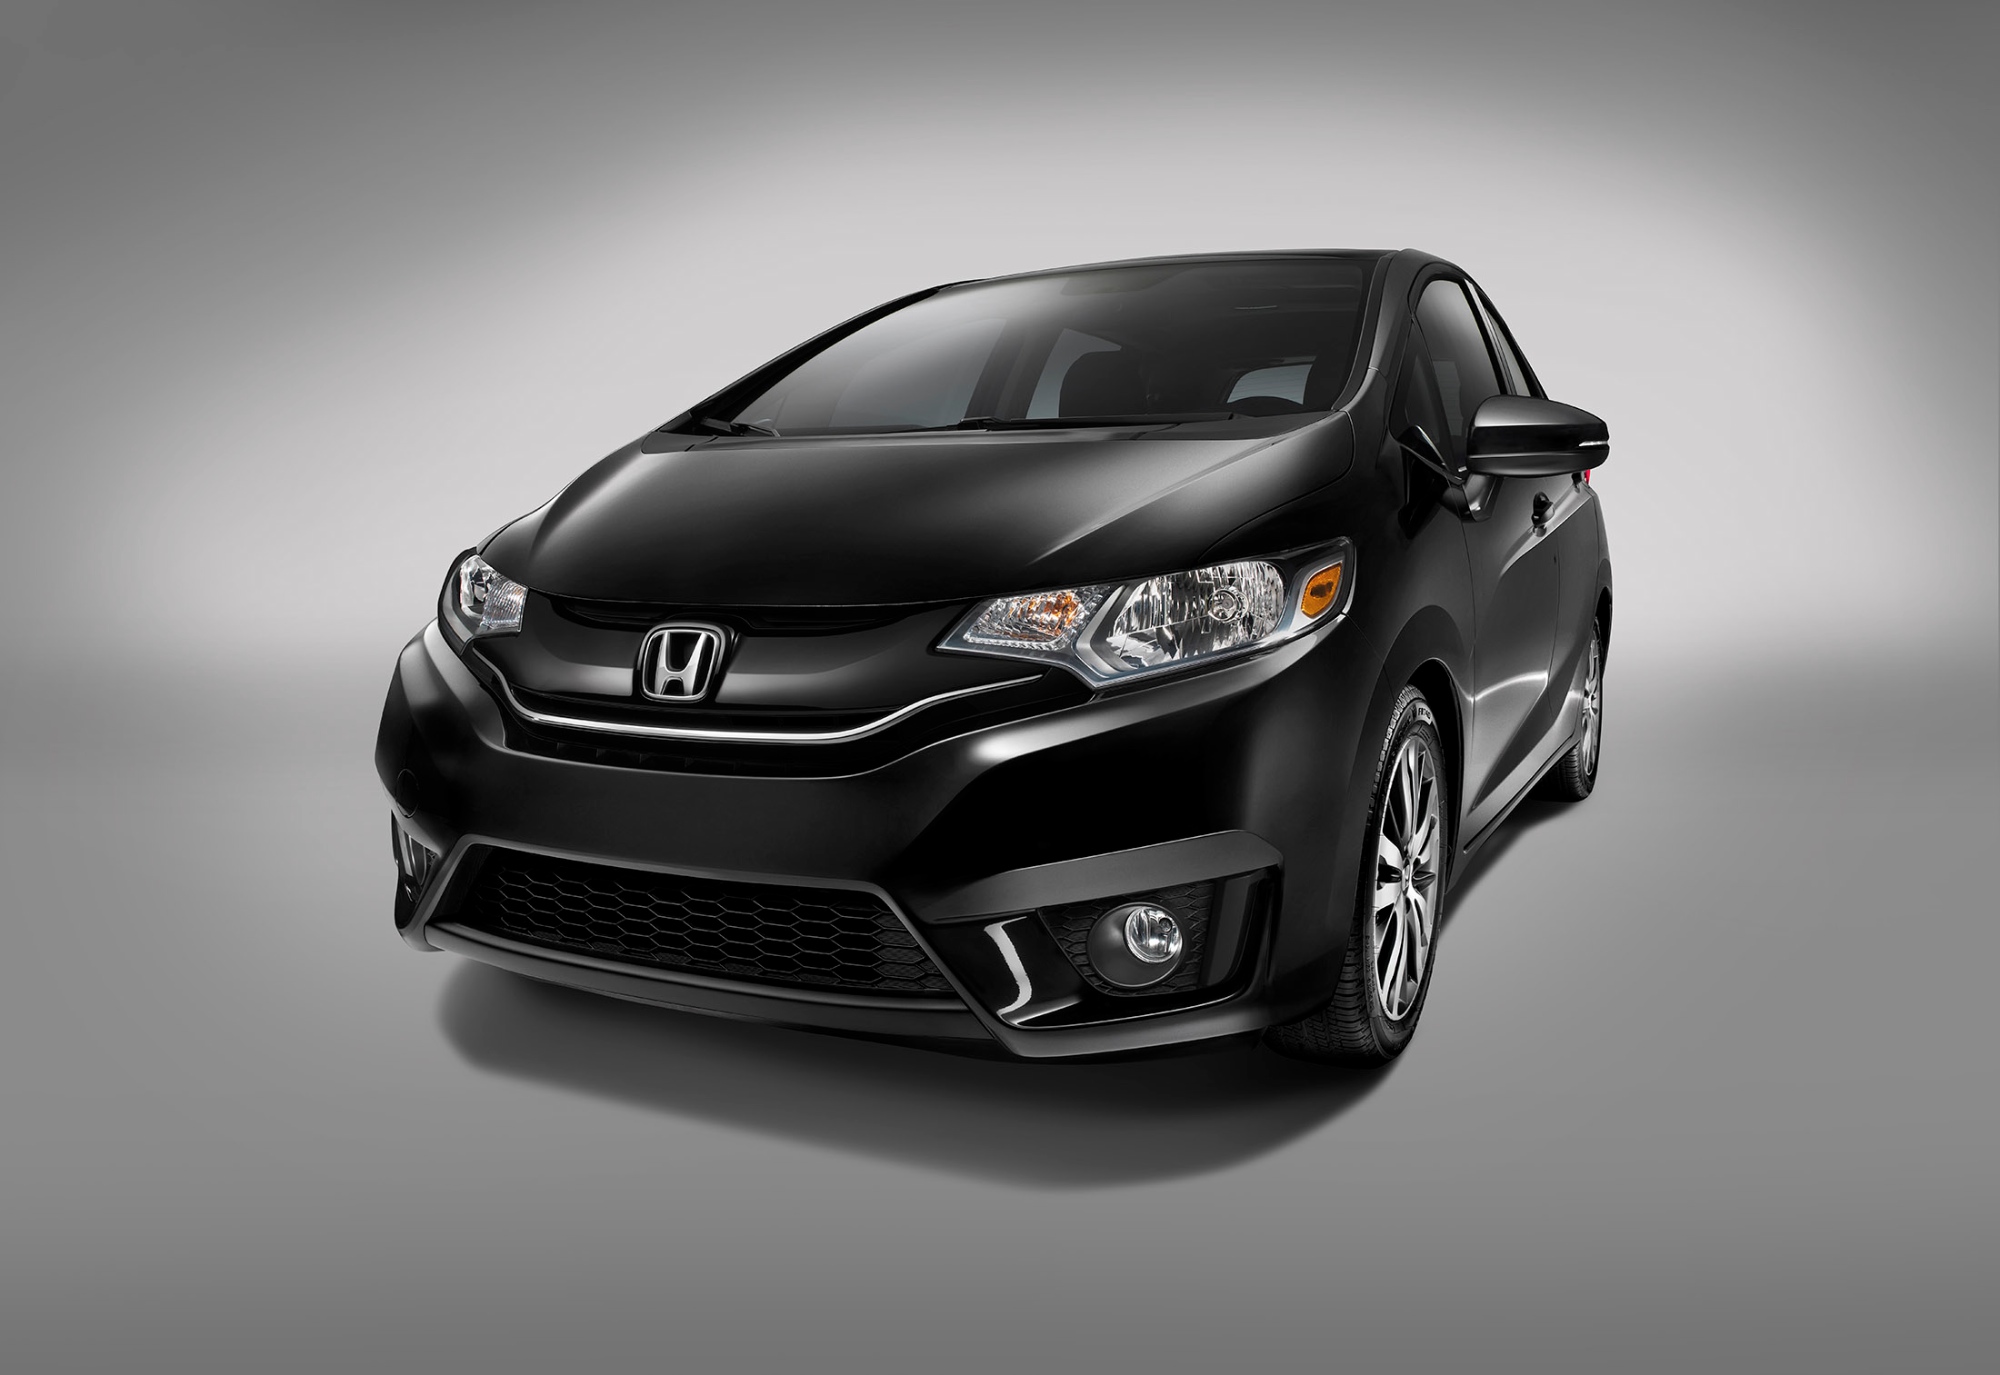 2015 Honda Fit Is a Cool New Urban Car for $15,525 ...